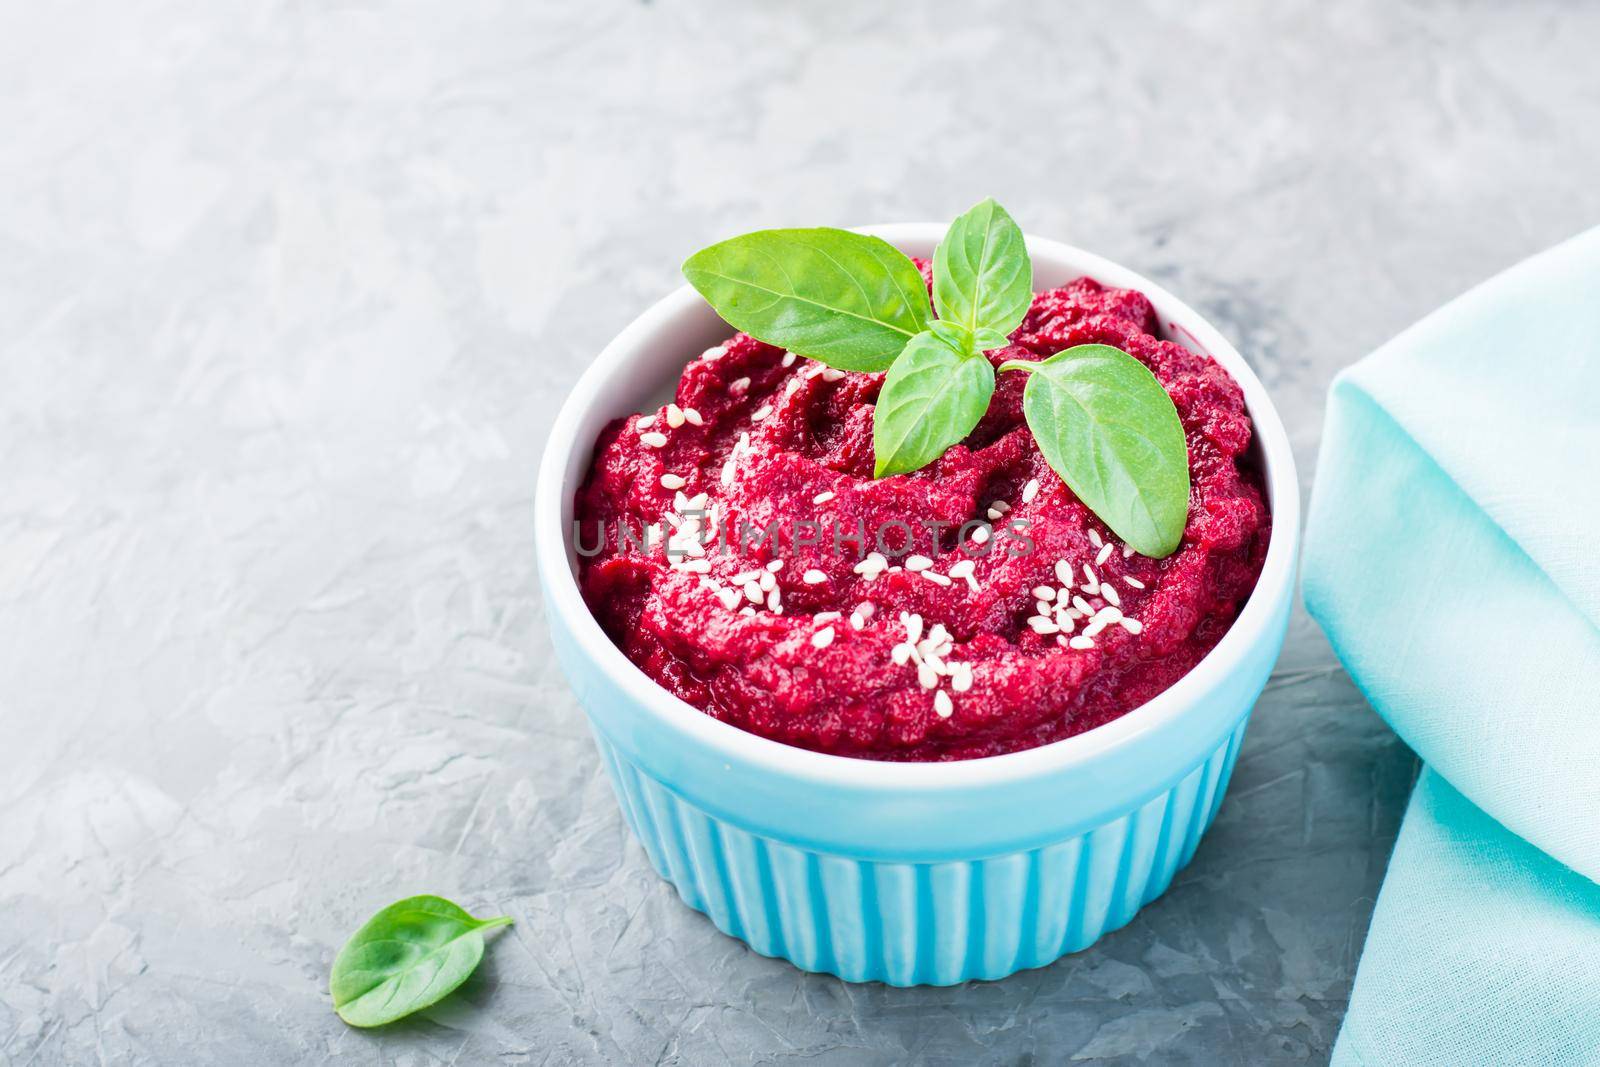 Homemade baked beetroot hummus in a bowl with sesame seeds and basil on the table. Close-up by Aleruana